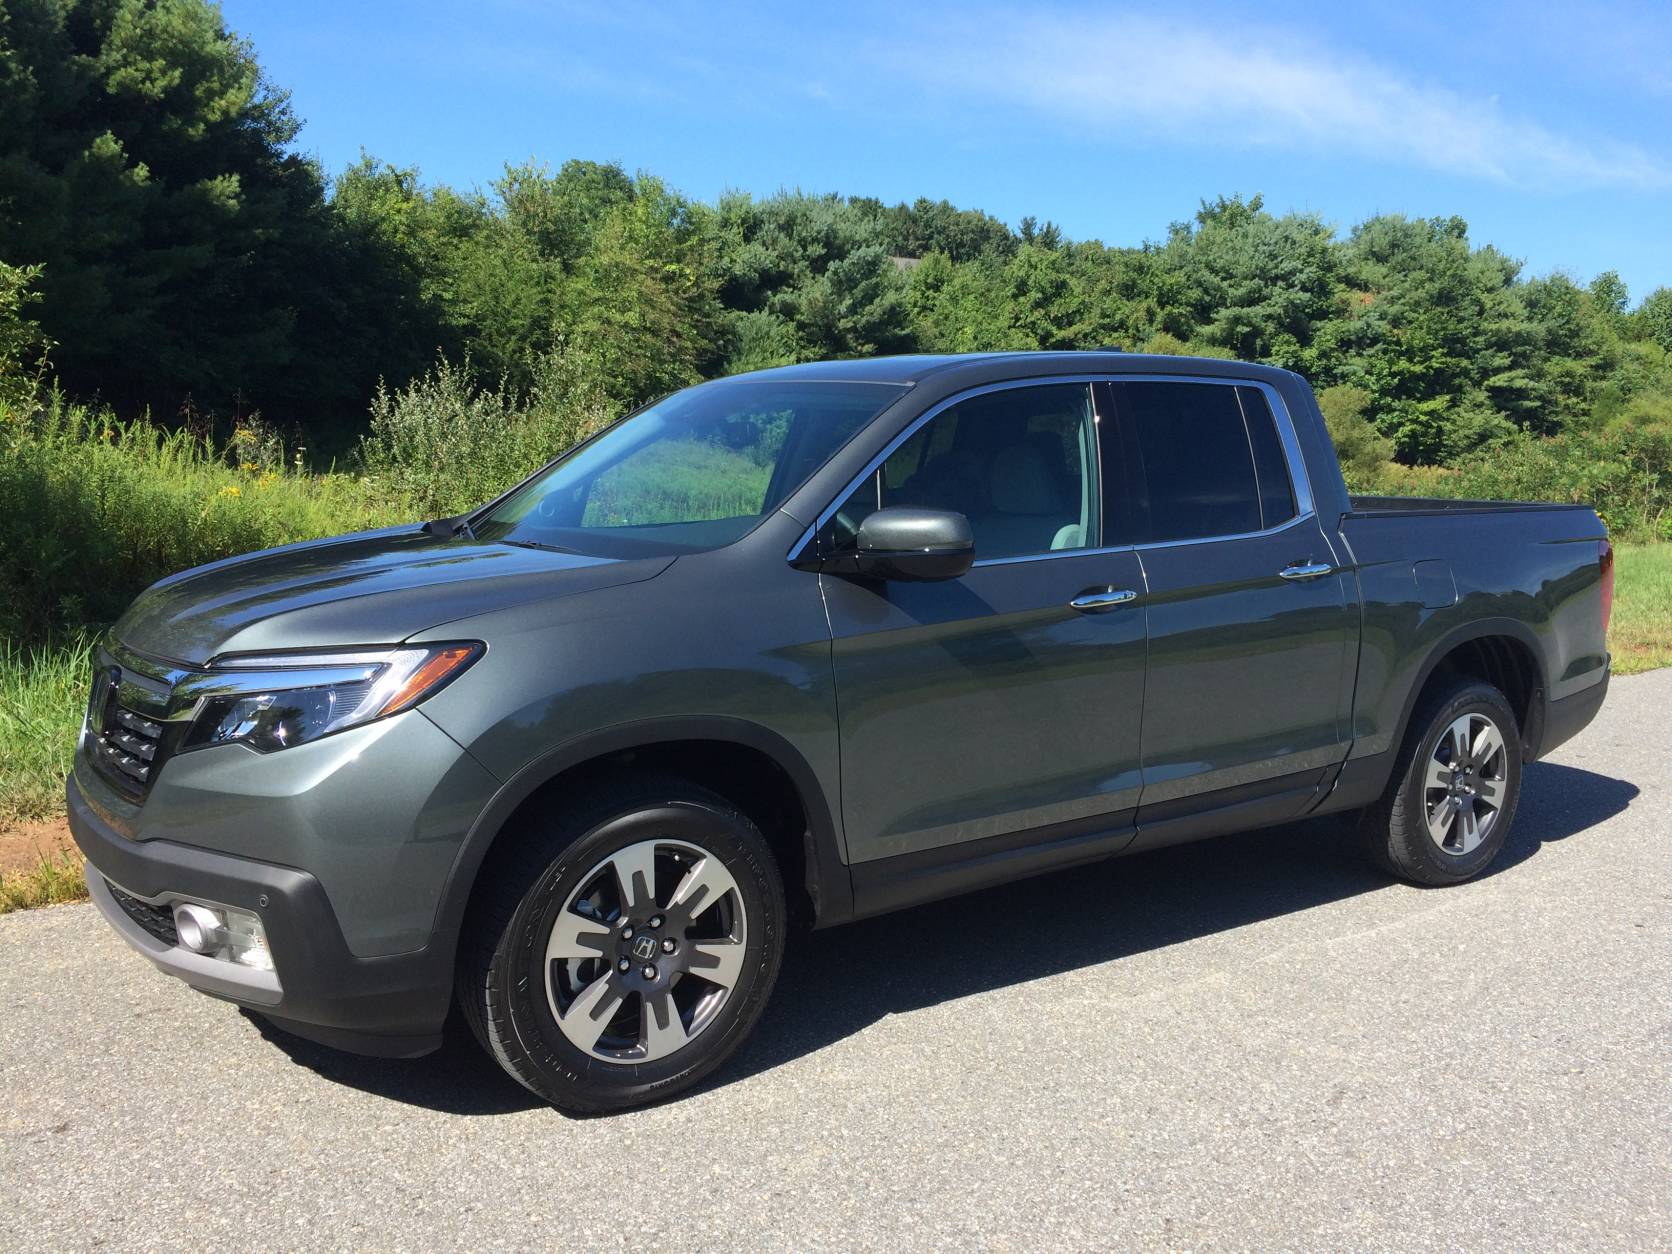 It might appear like a normal truck with a separate cab and bed but it’s really just for show. The 2017 Honda Ridgeline AWD is still not the most macho looking machine on the road and it has the front end styling of the Pilot crossover. (WTOP/Mike Parris)